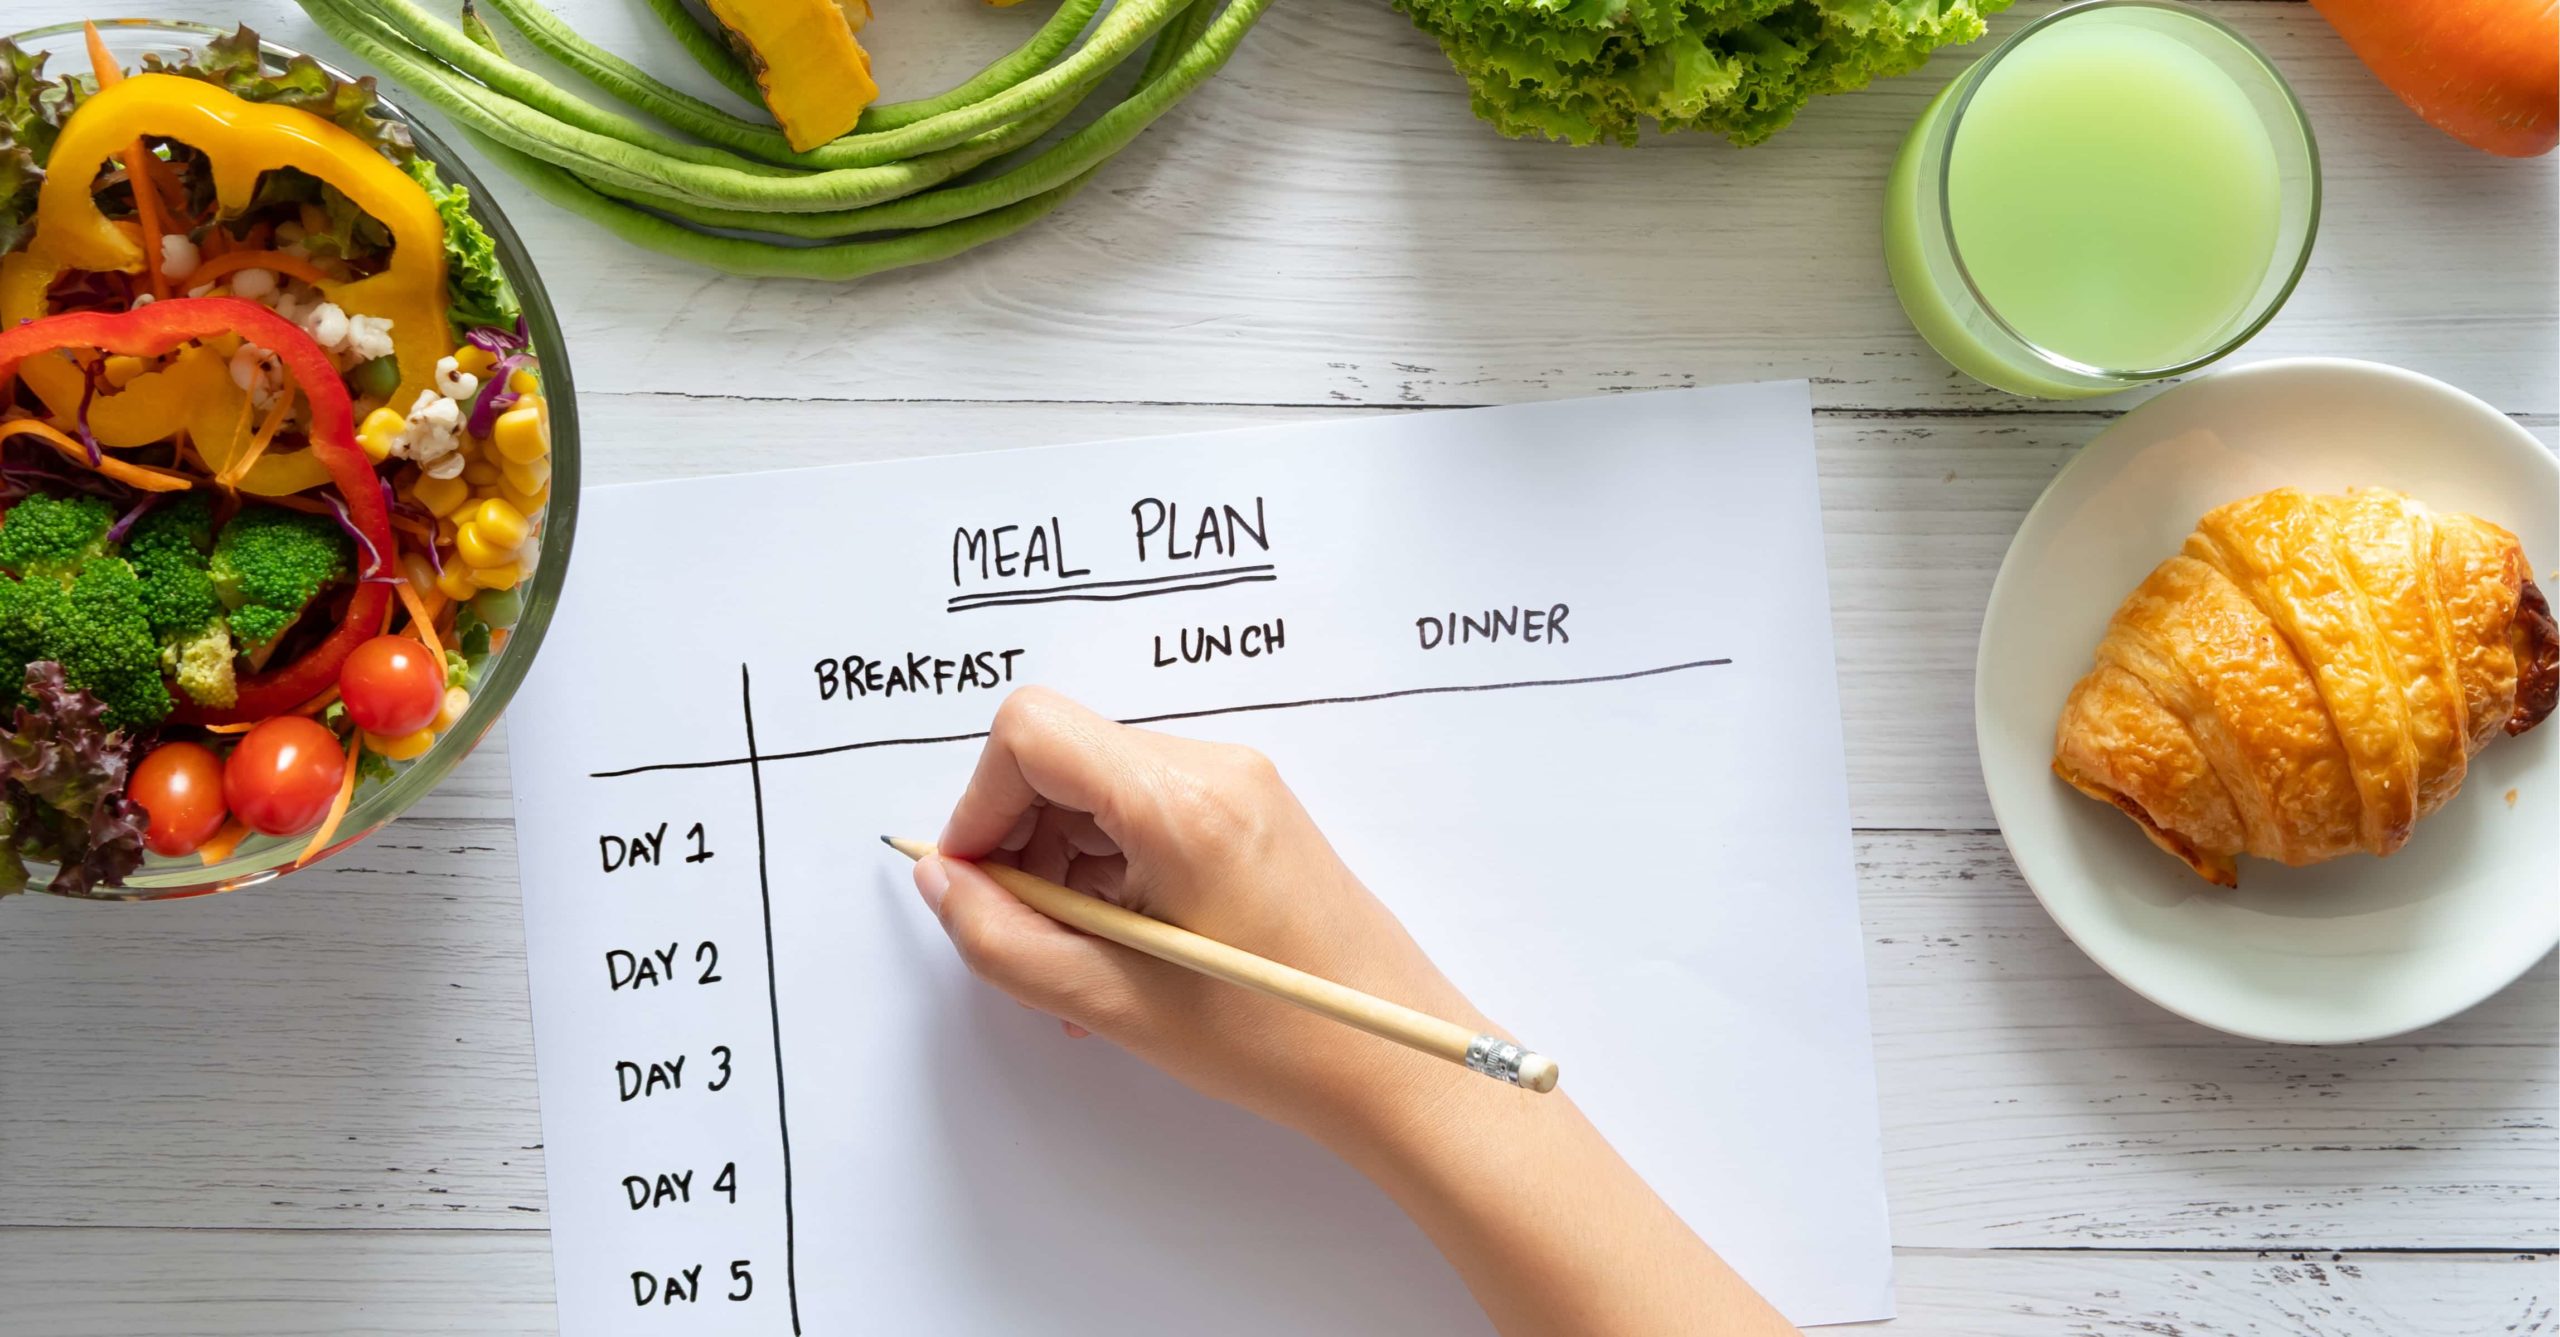 How Meal Planning Can Save Money